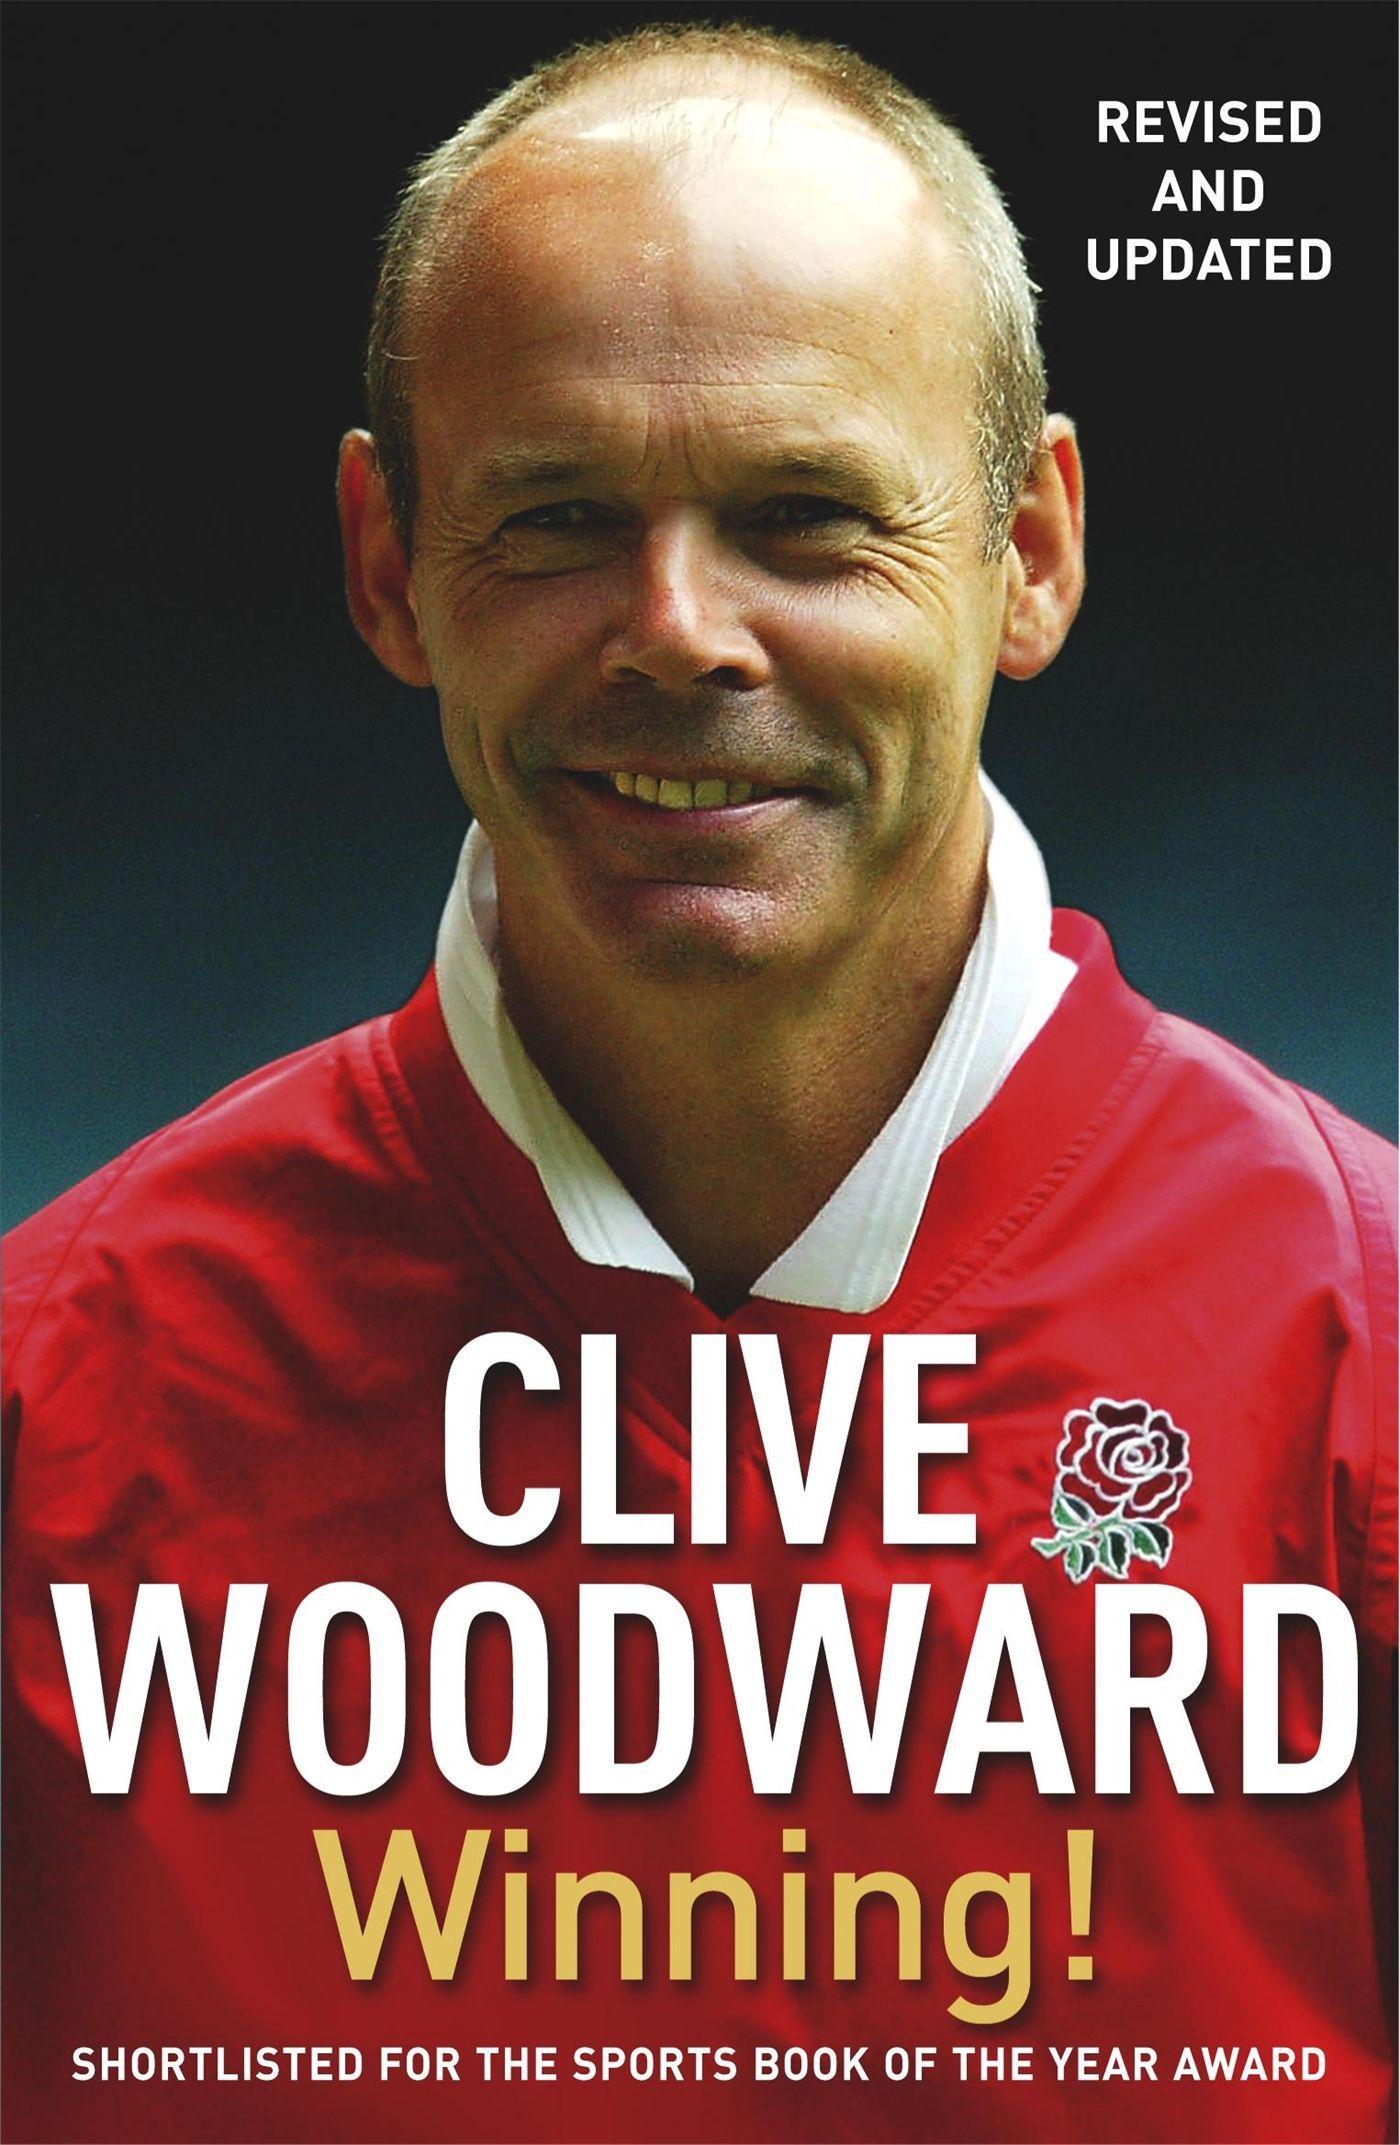 Winning! - Woodward, Clive